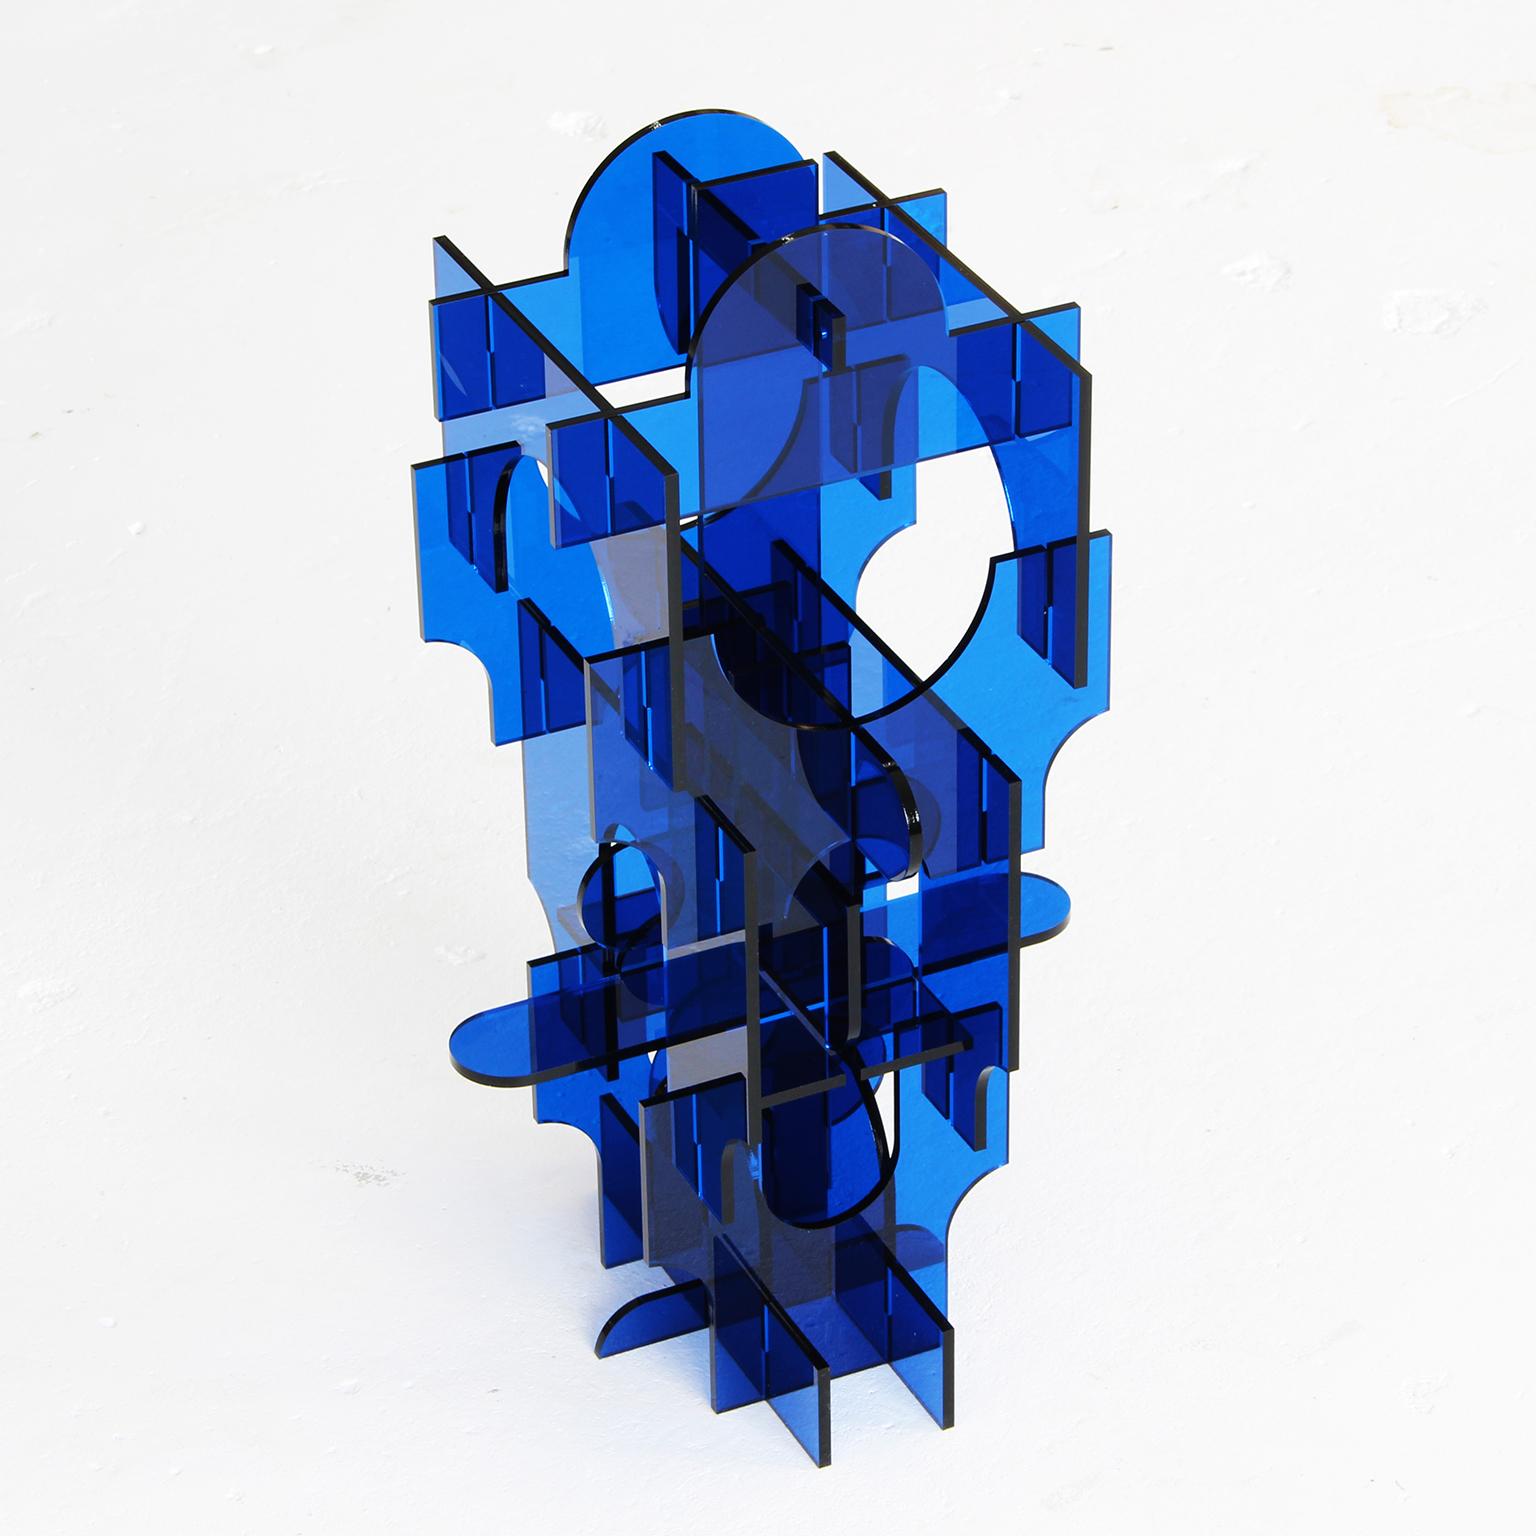 22-piece acrylic assemblage (no glue)
Material: 1/4 in transparent blue acrylic

The works of David Umemoto stand as studies about volume. At the juncture of sculpture and architecture, these miniature pieces evoke temporary buildings or monuments